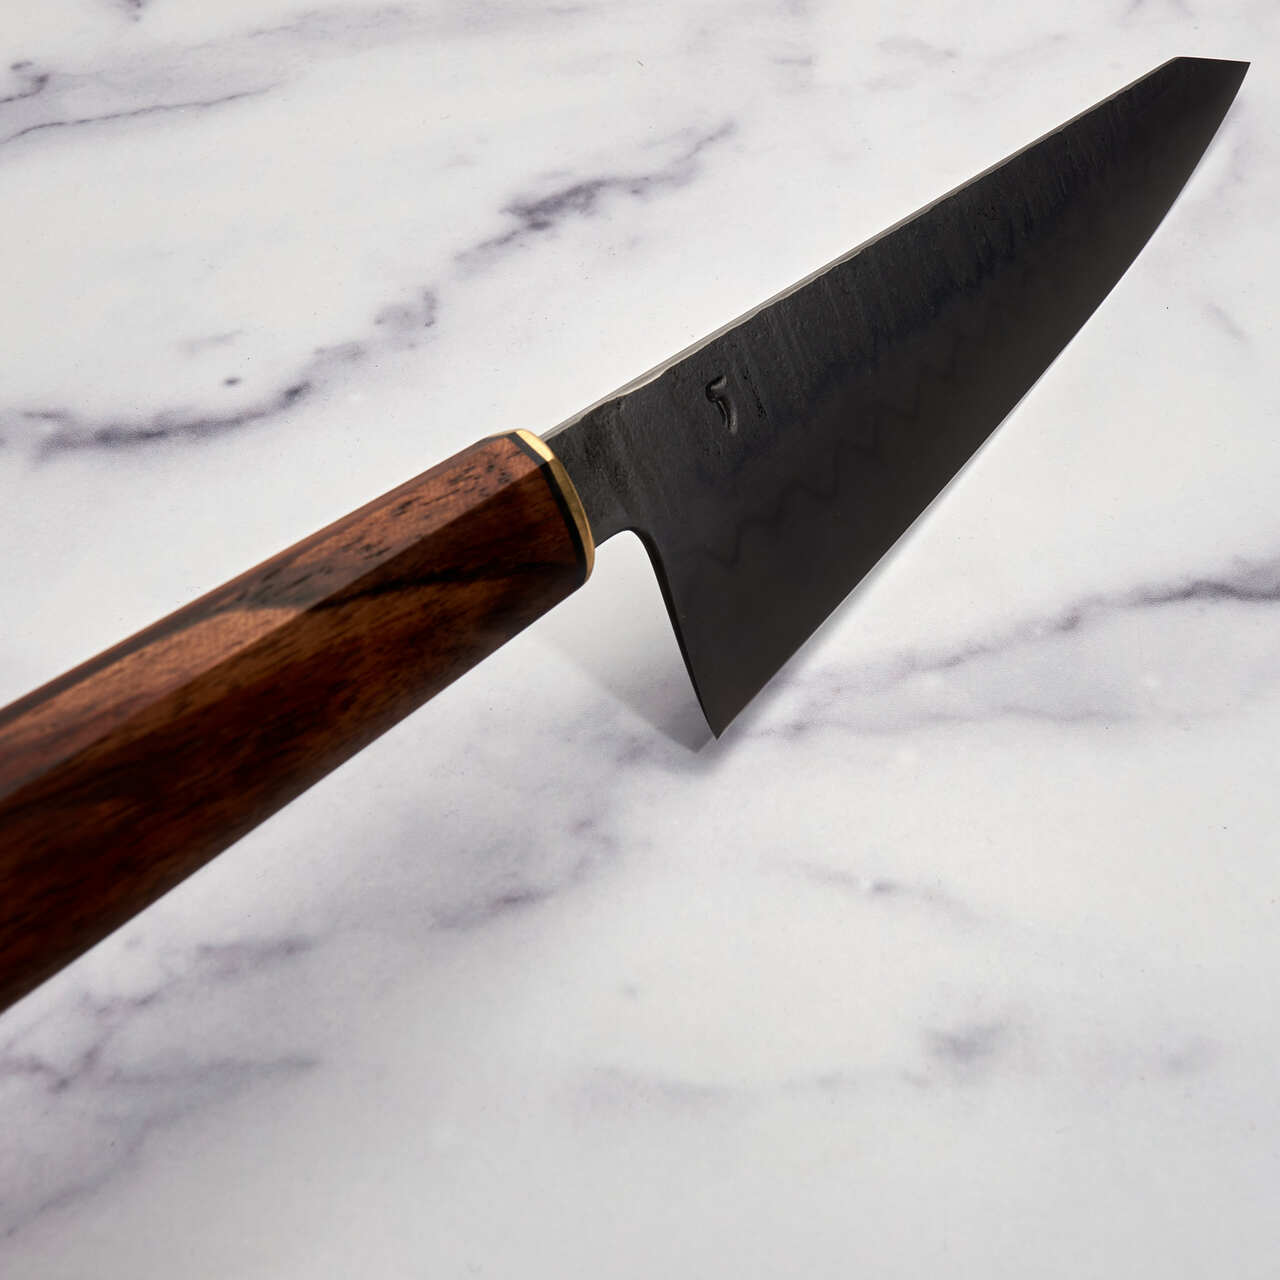 MCX K-Tip Gyuto 250mm 26c3 Limited Release by Fredrik Spåre - 2nd Edition - Handle